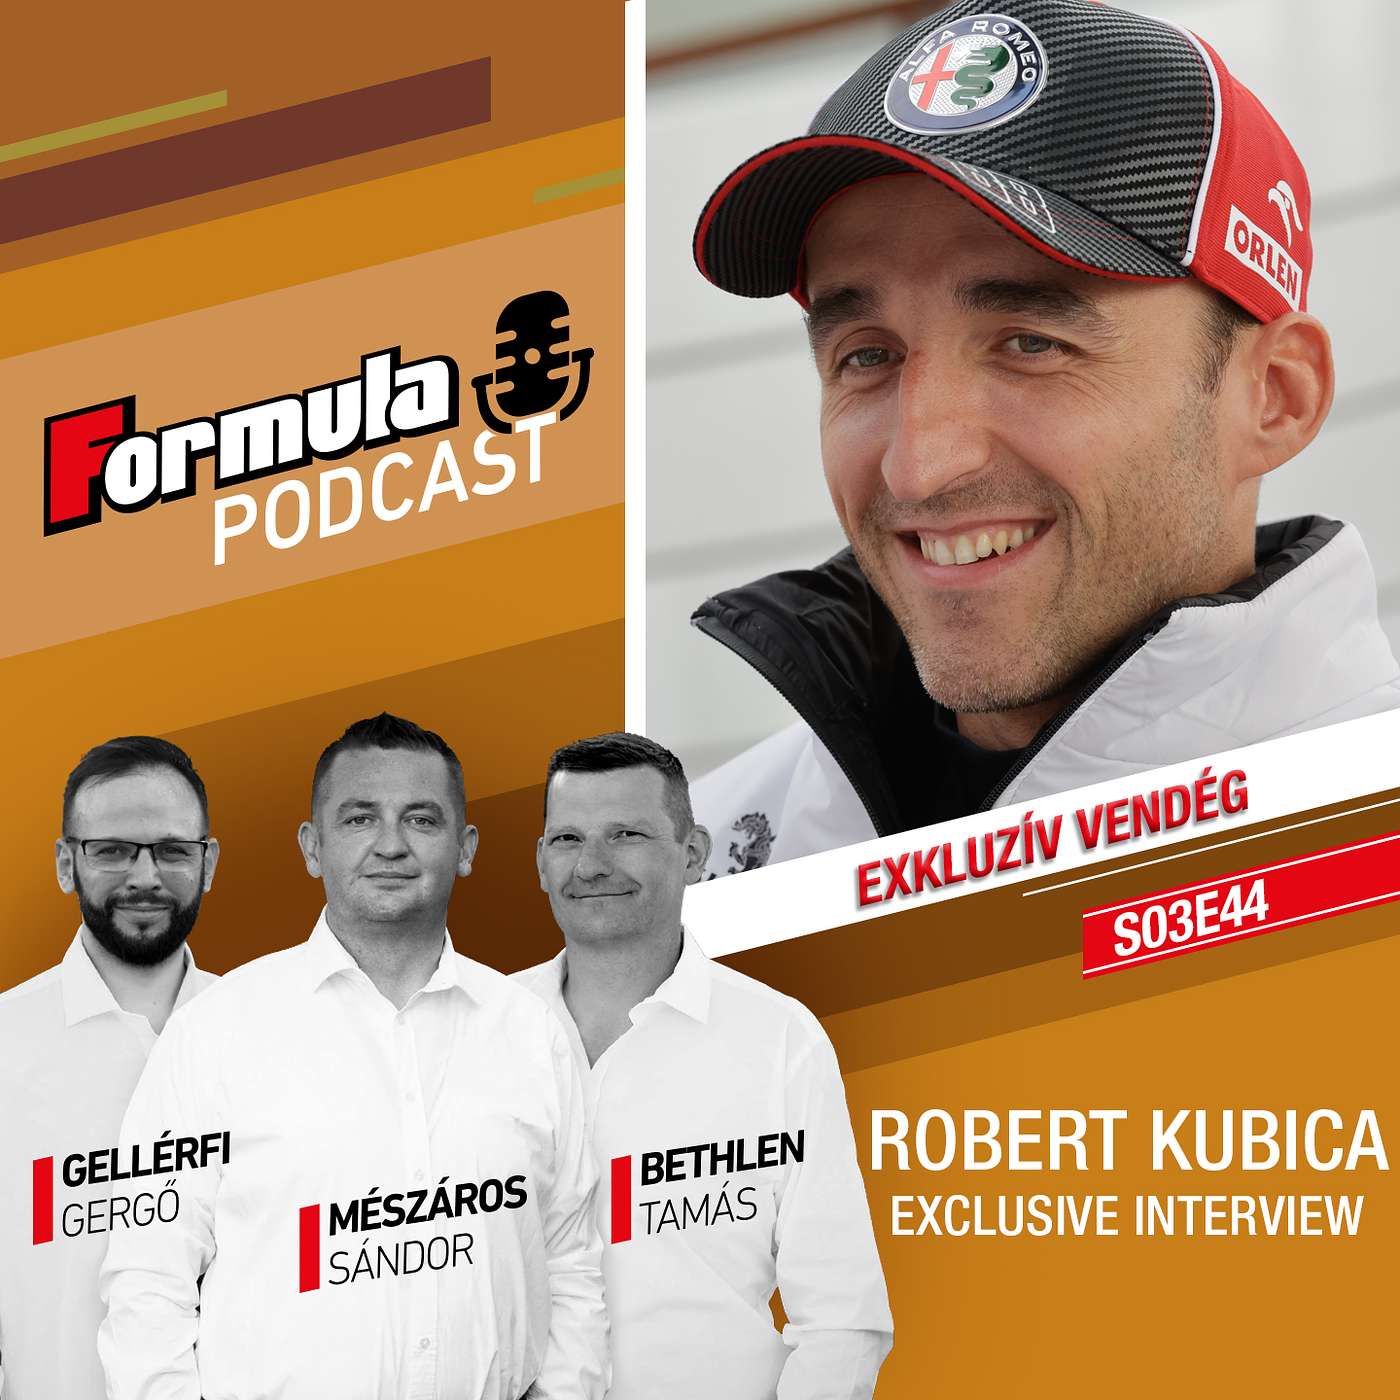 S03EP44 – Exclusive chat with Robert Kubica